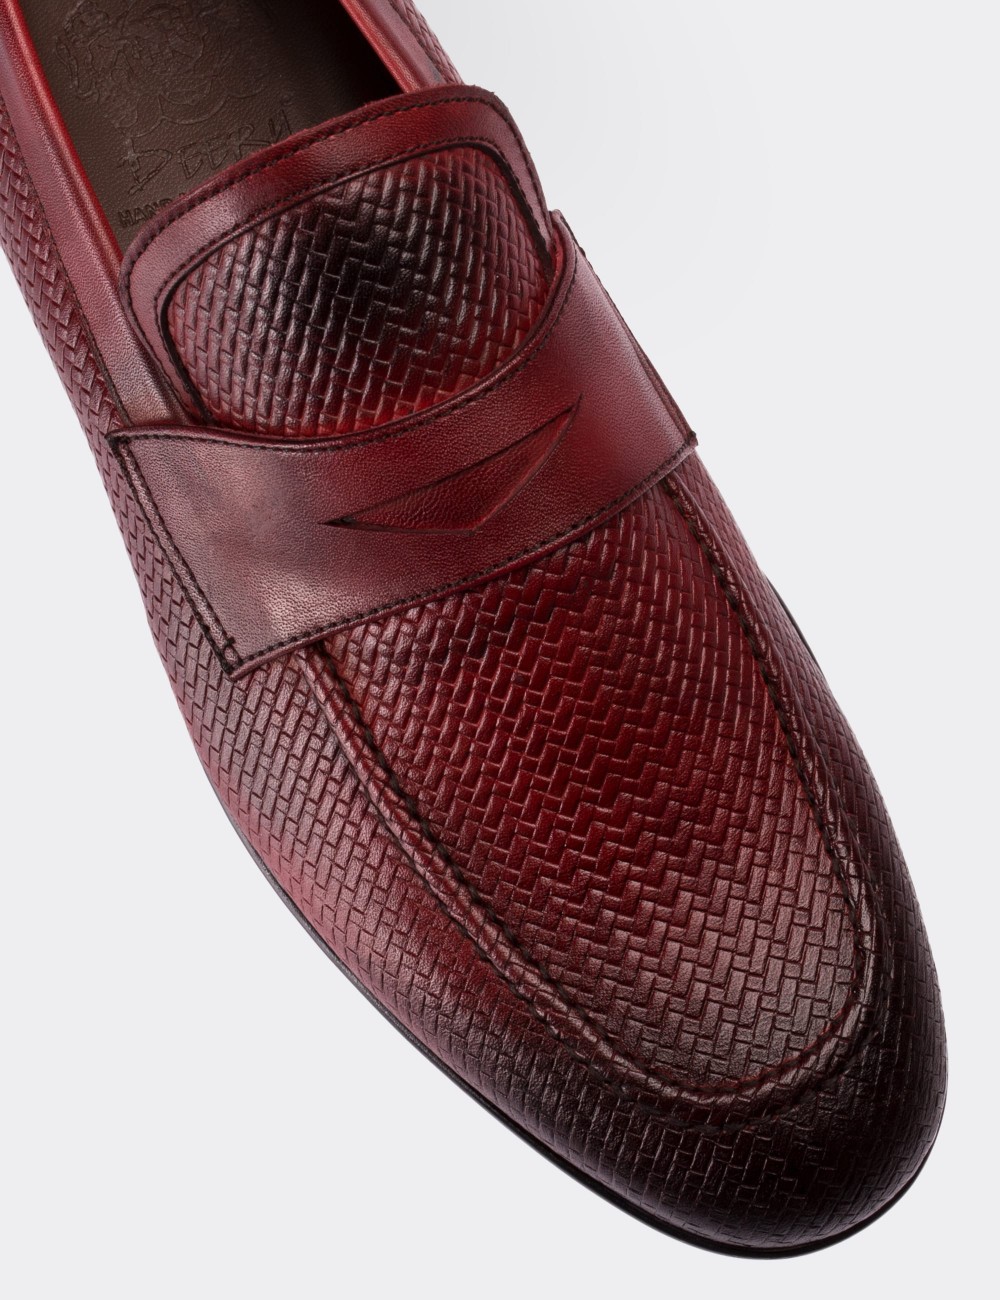 Red  Leather Loafers - 01711MKRMC01